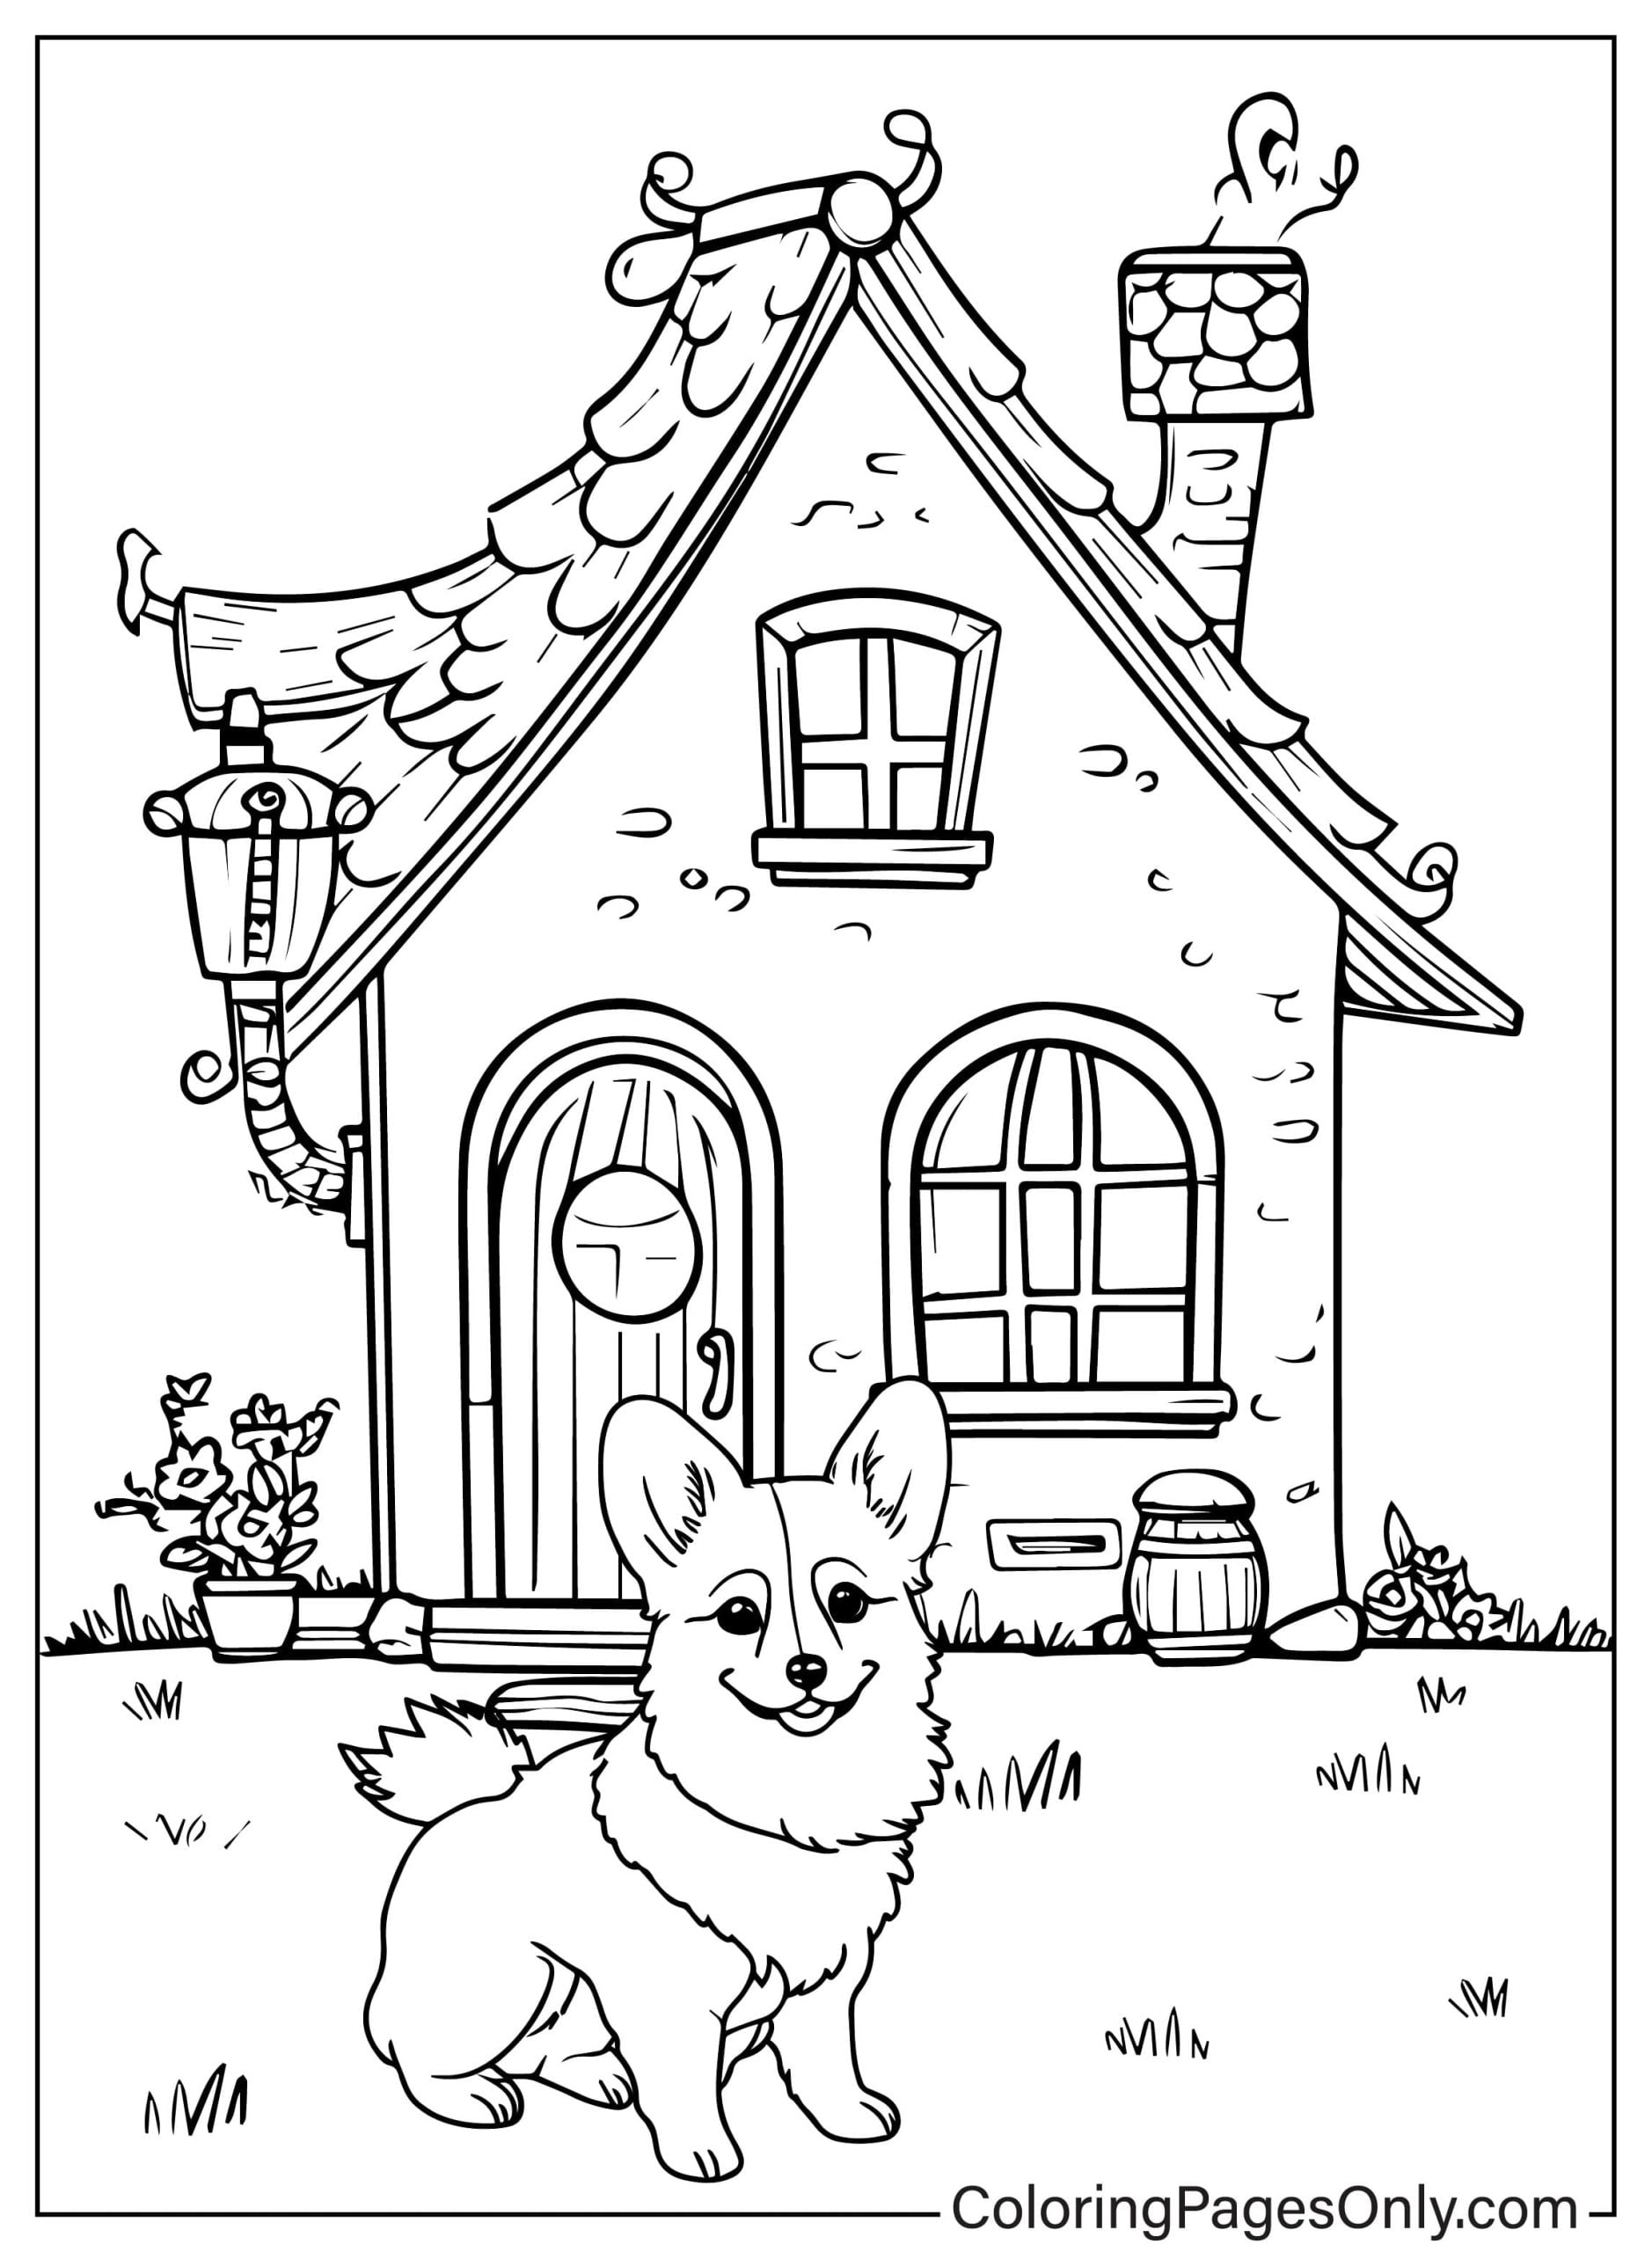 Little Corgi Dog Happily Sits and Guards the House from Corgi